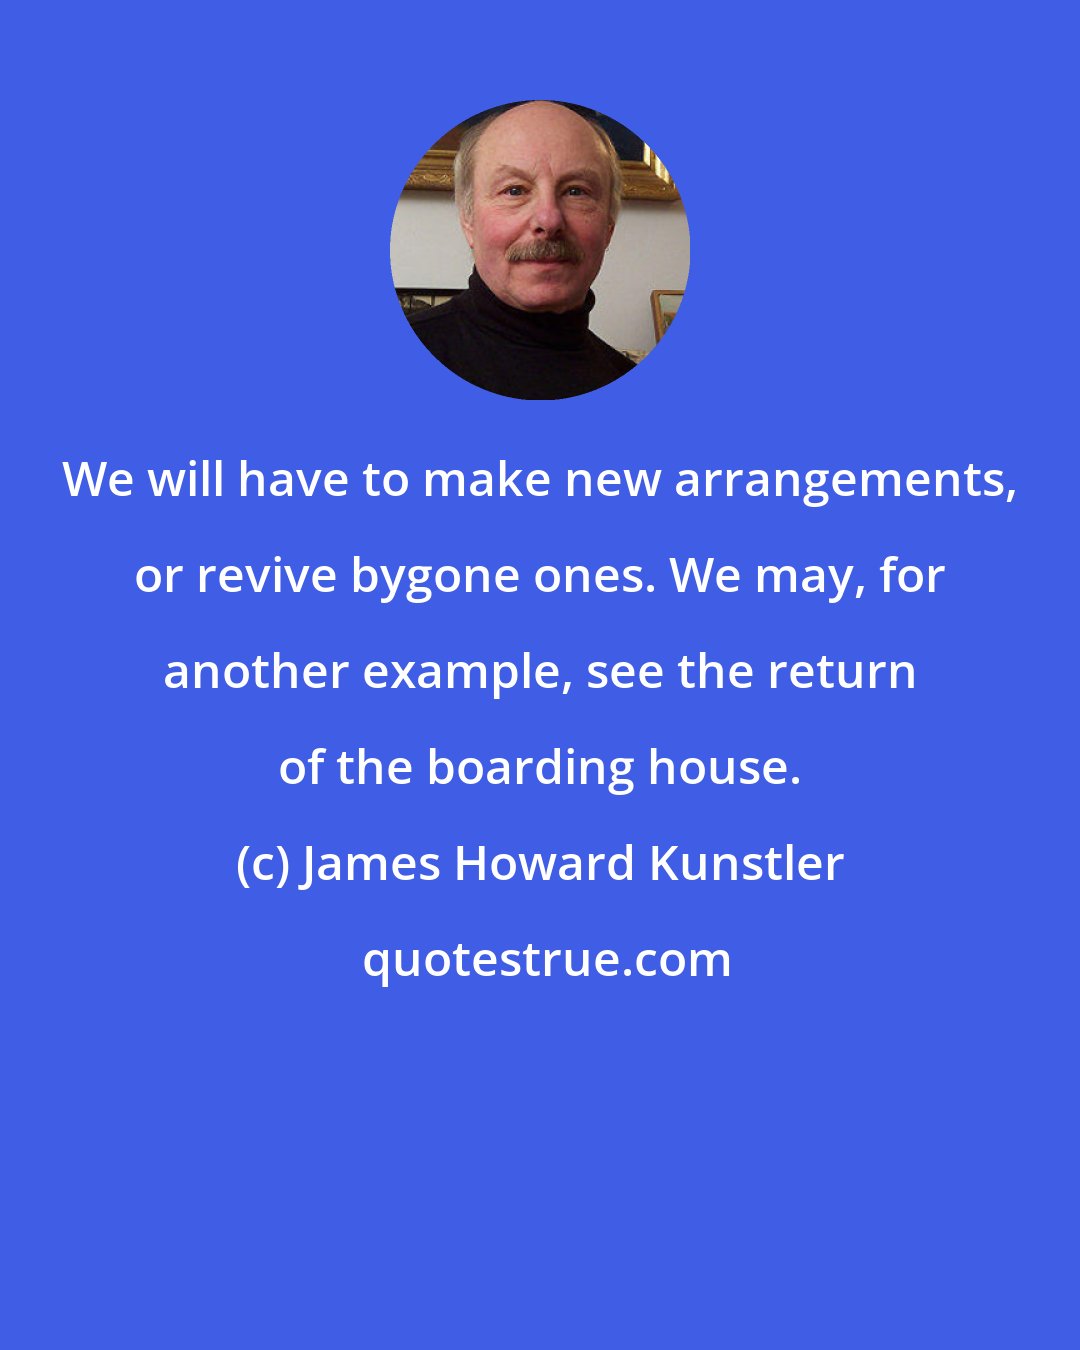 James Howard Kunstler: We will have to make new arrangements, or revive bygone ones. We may, for another example, see the return of the boarding house.